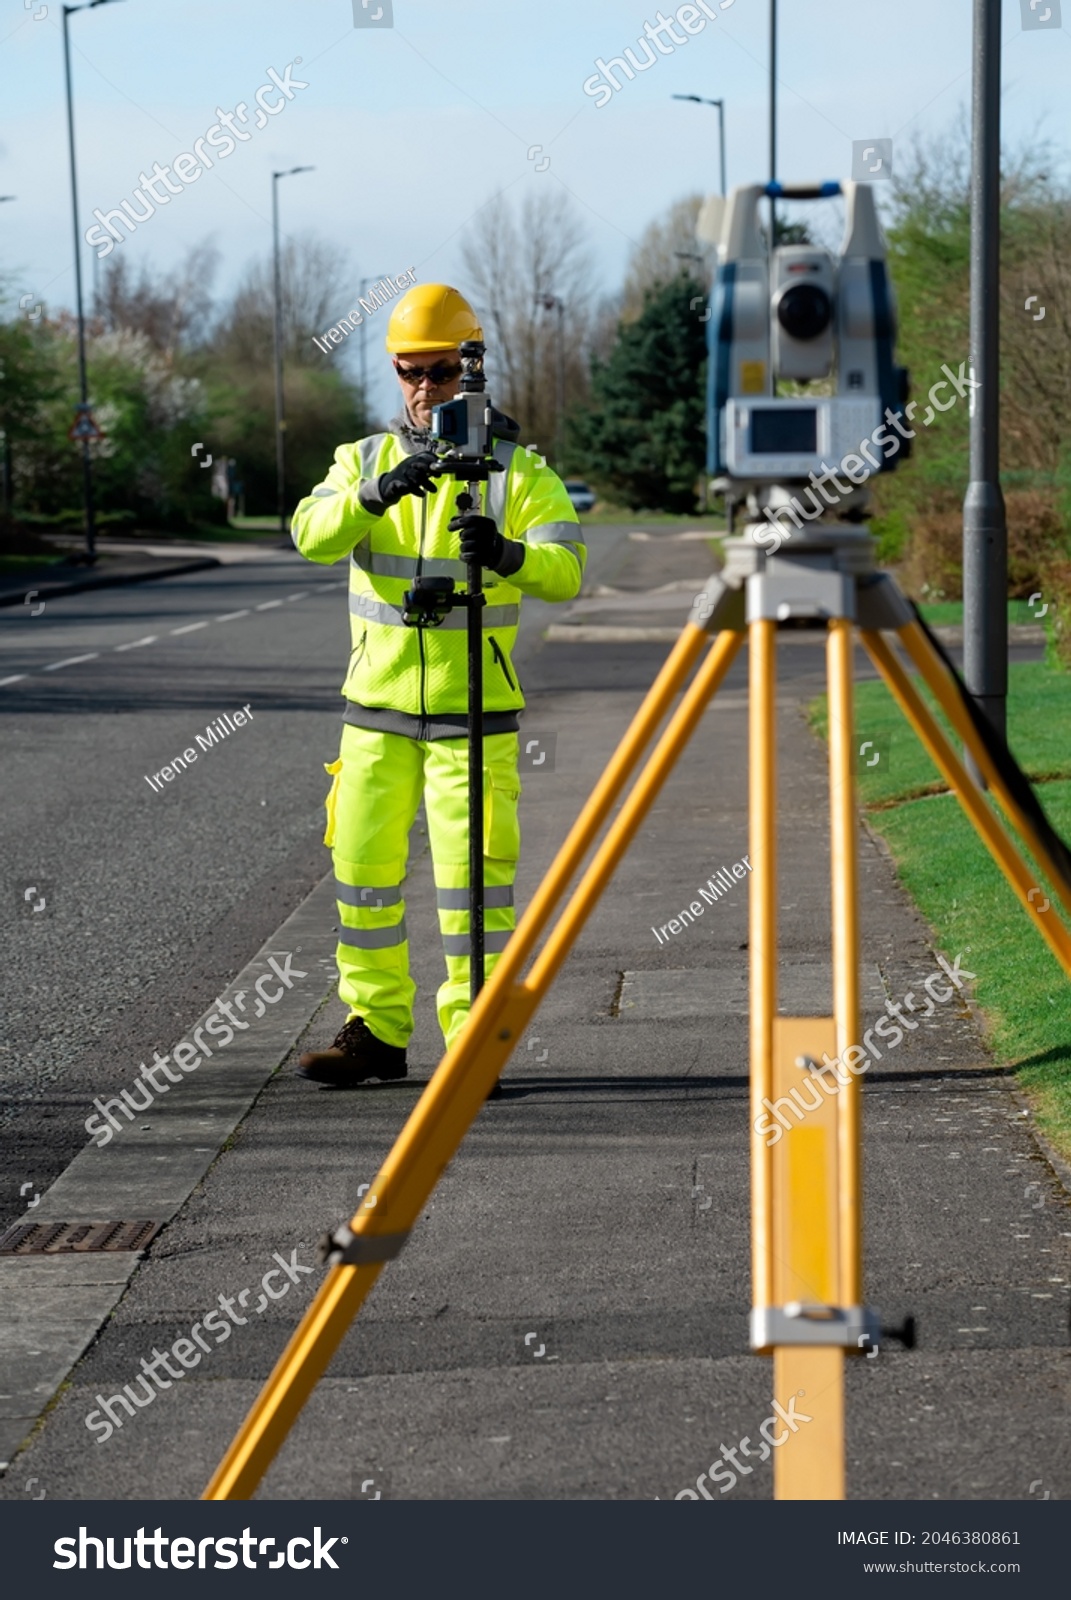 Land surveyor performing initial survey of the road levels and kerb lines before start of construction works using robotic tacheometer controlled by remote control and prism on pogo. #2046380861